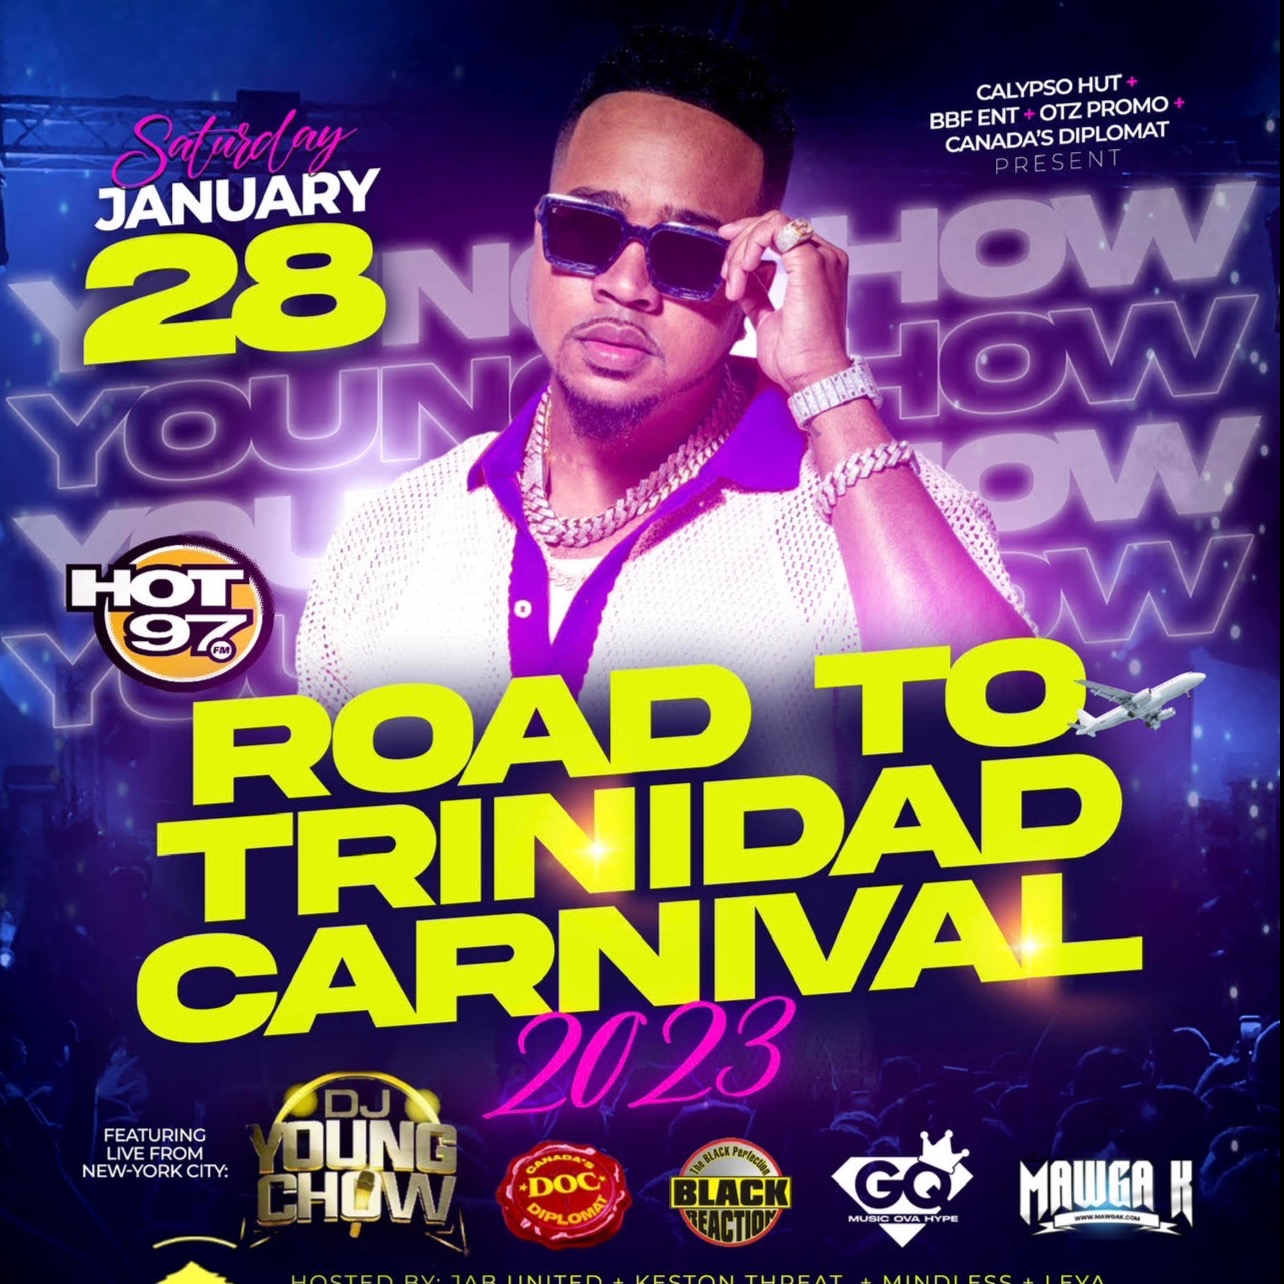 ROAD TO CARNIVAL